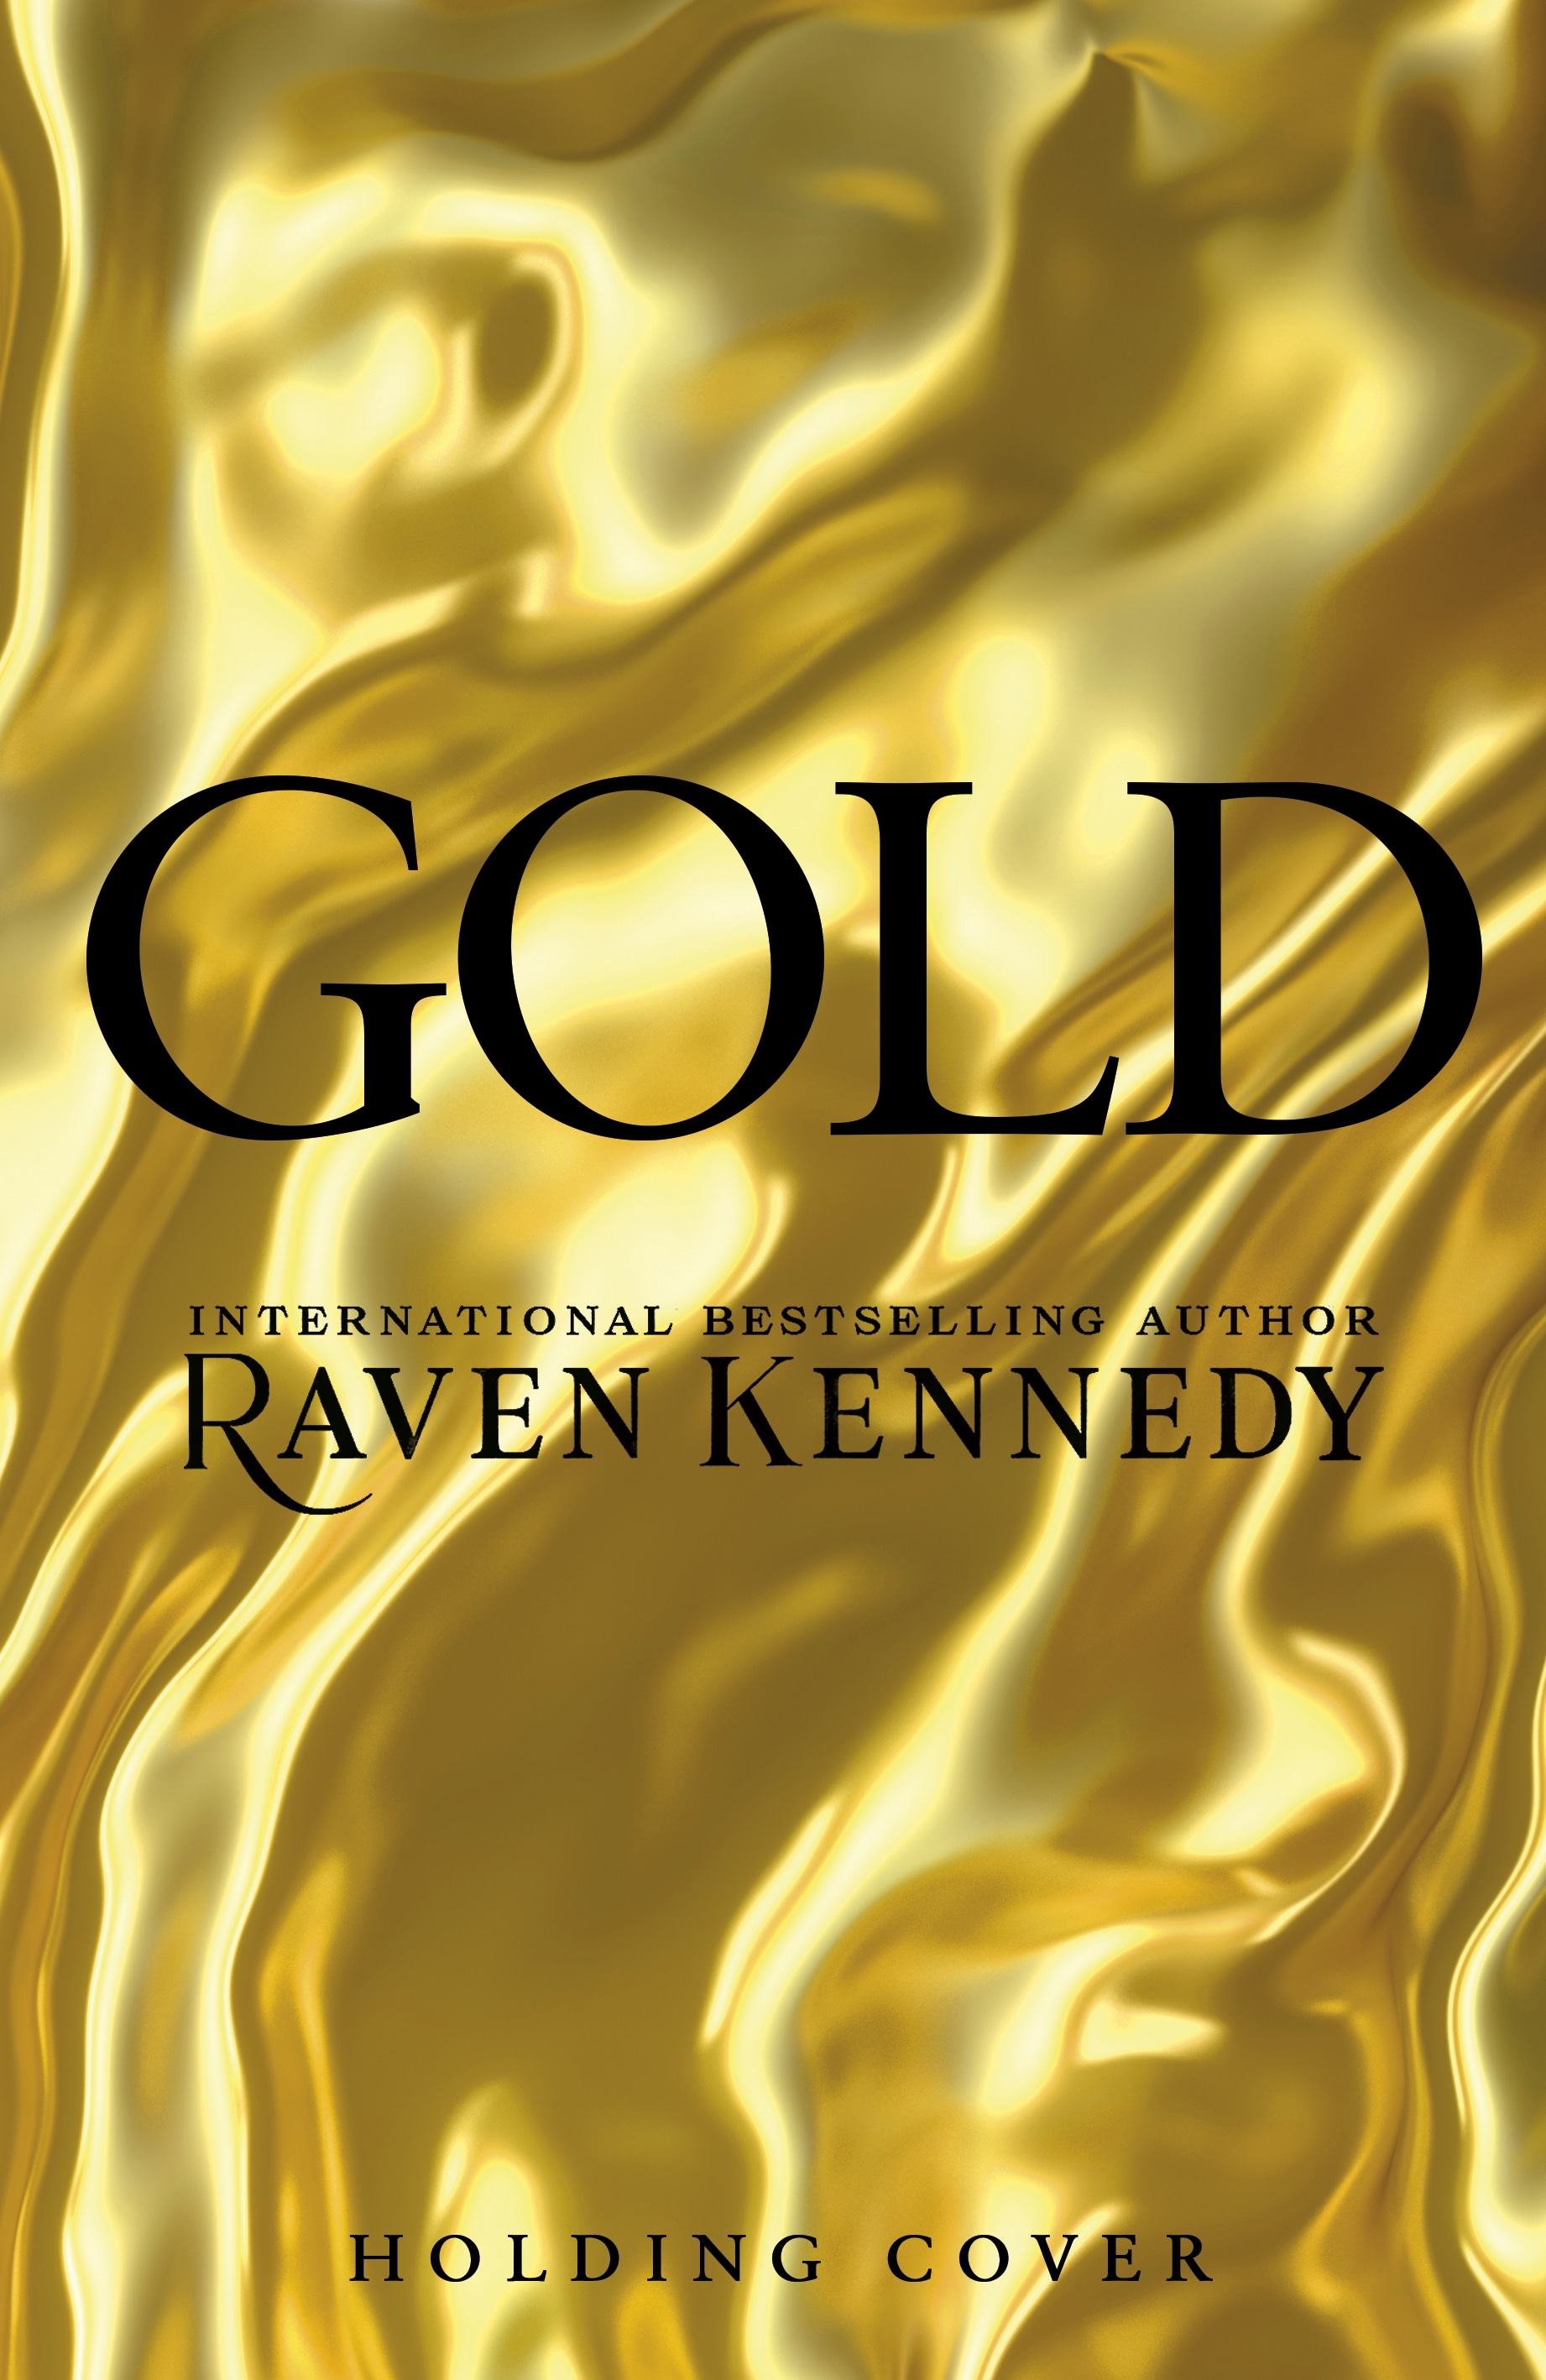 Book “Gold” by Raven Kennedy — June 8, 2023